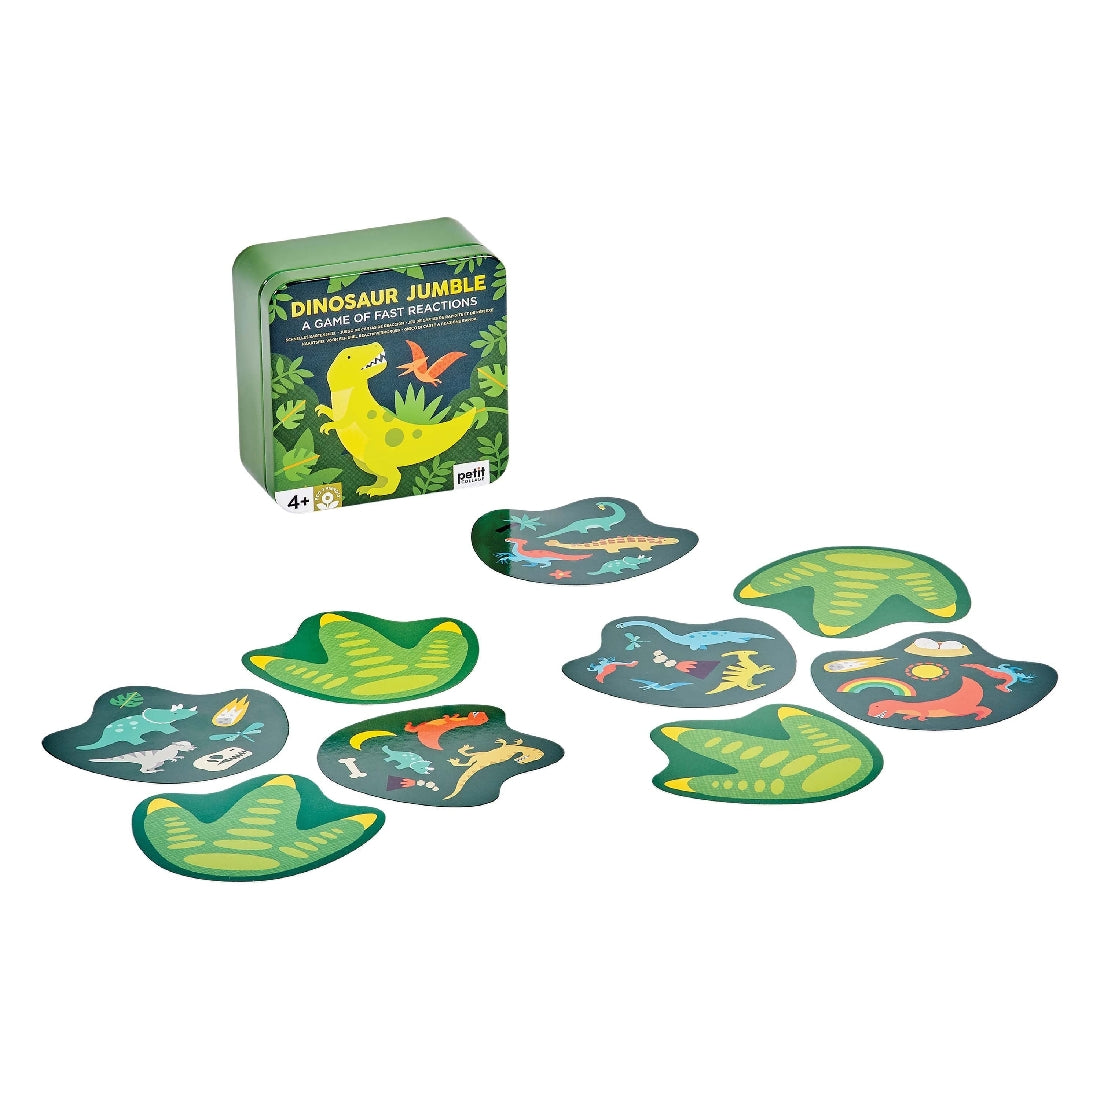 DINOSAUR JUMBLE - A GAME OF FAST REACTIONS